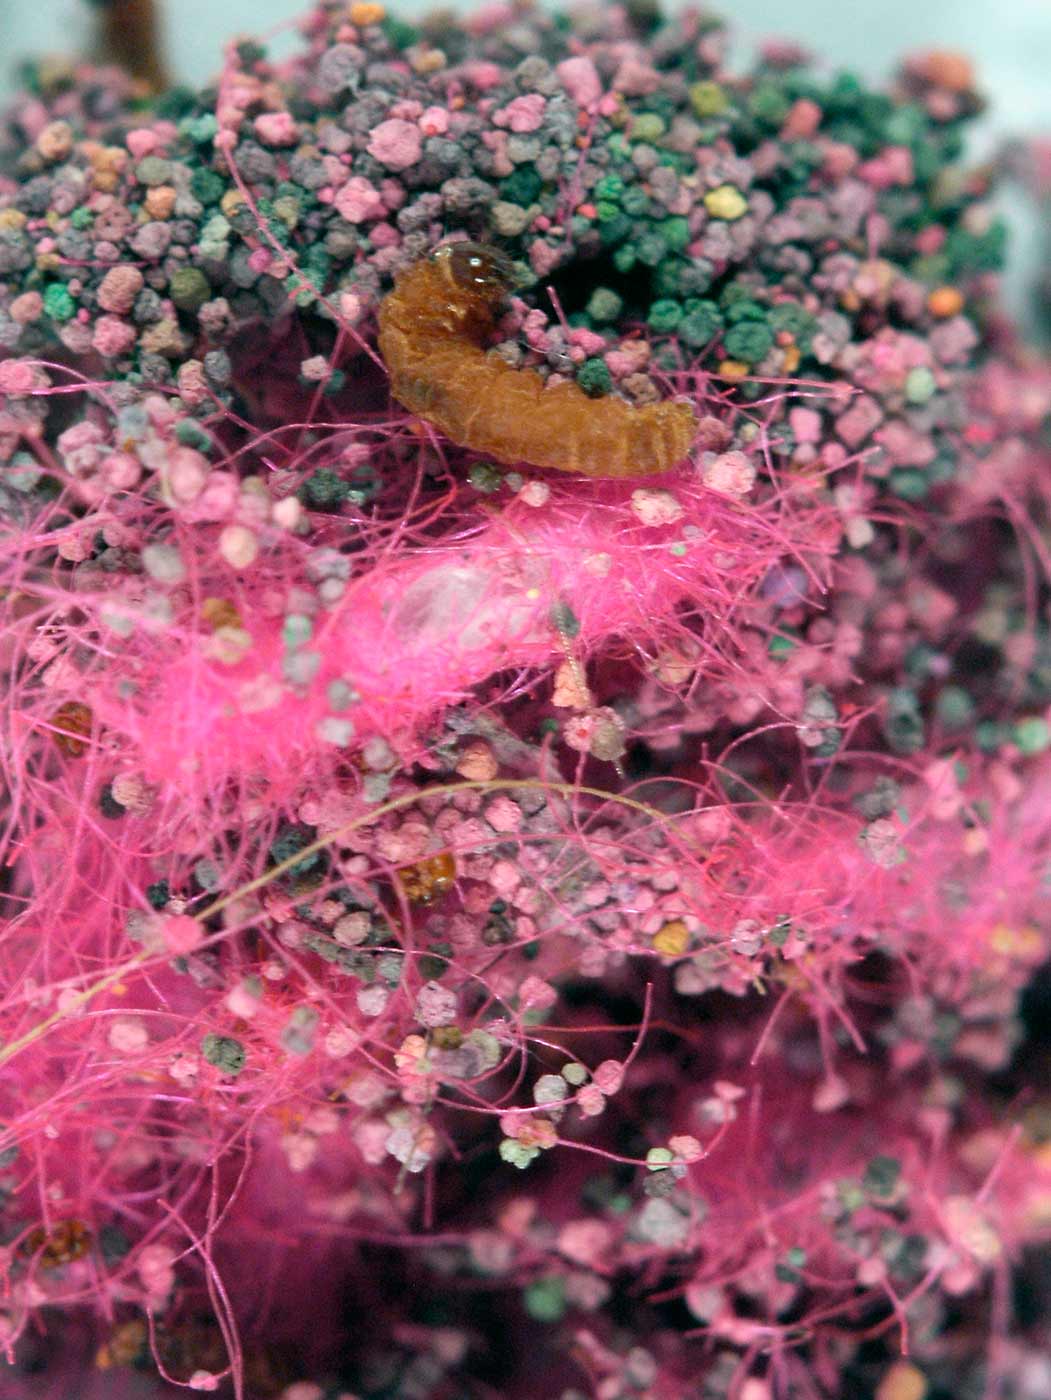 Colour photograph showing a small brown caterpillar-like create surrounded by pink fabric fibres and small pink droppings. - click to view larger image